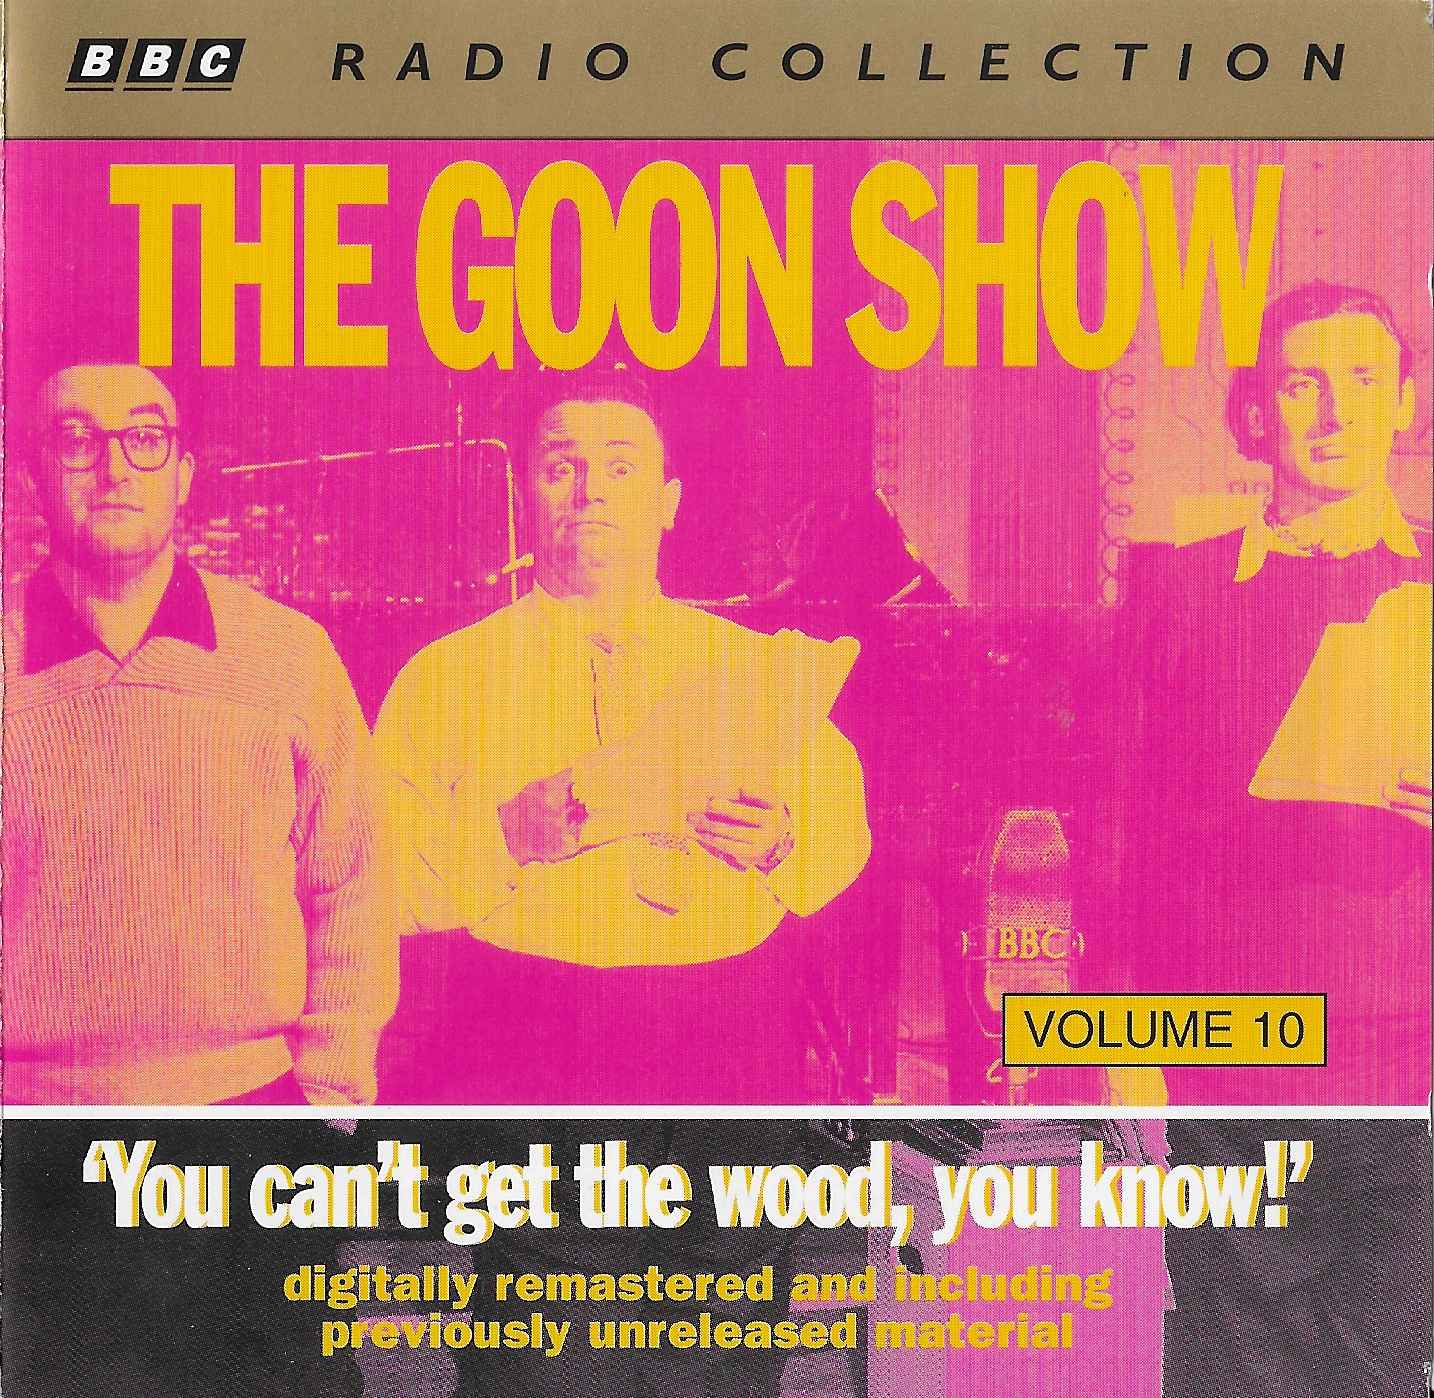 Picture of ZBBC 1978 CD The Goon Show 10 - You can't get the wood, you know! by artist Spike Milligan / Eric Sykes / Larry Stephens from the BBC cds - Records and Tapes library